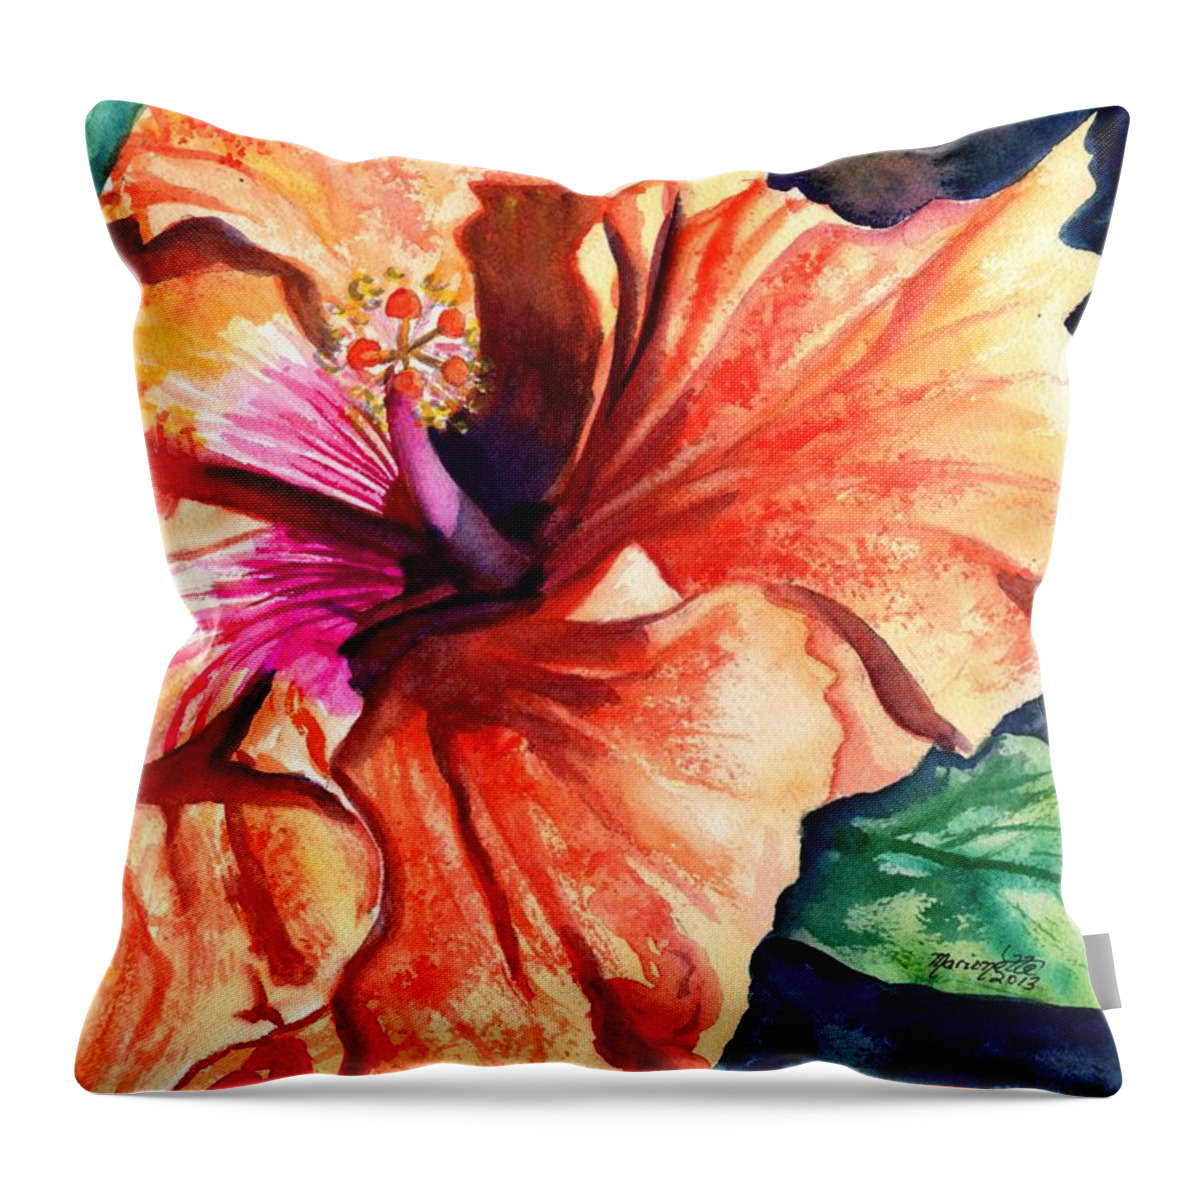 Orange Hibiscus Throw Pillow featuring the painting Tropical Hibiscus by Marionette Taboniar